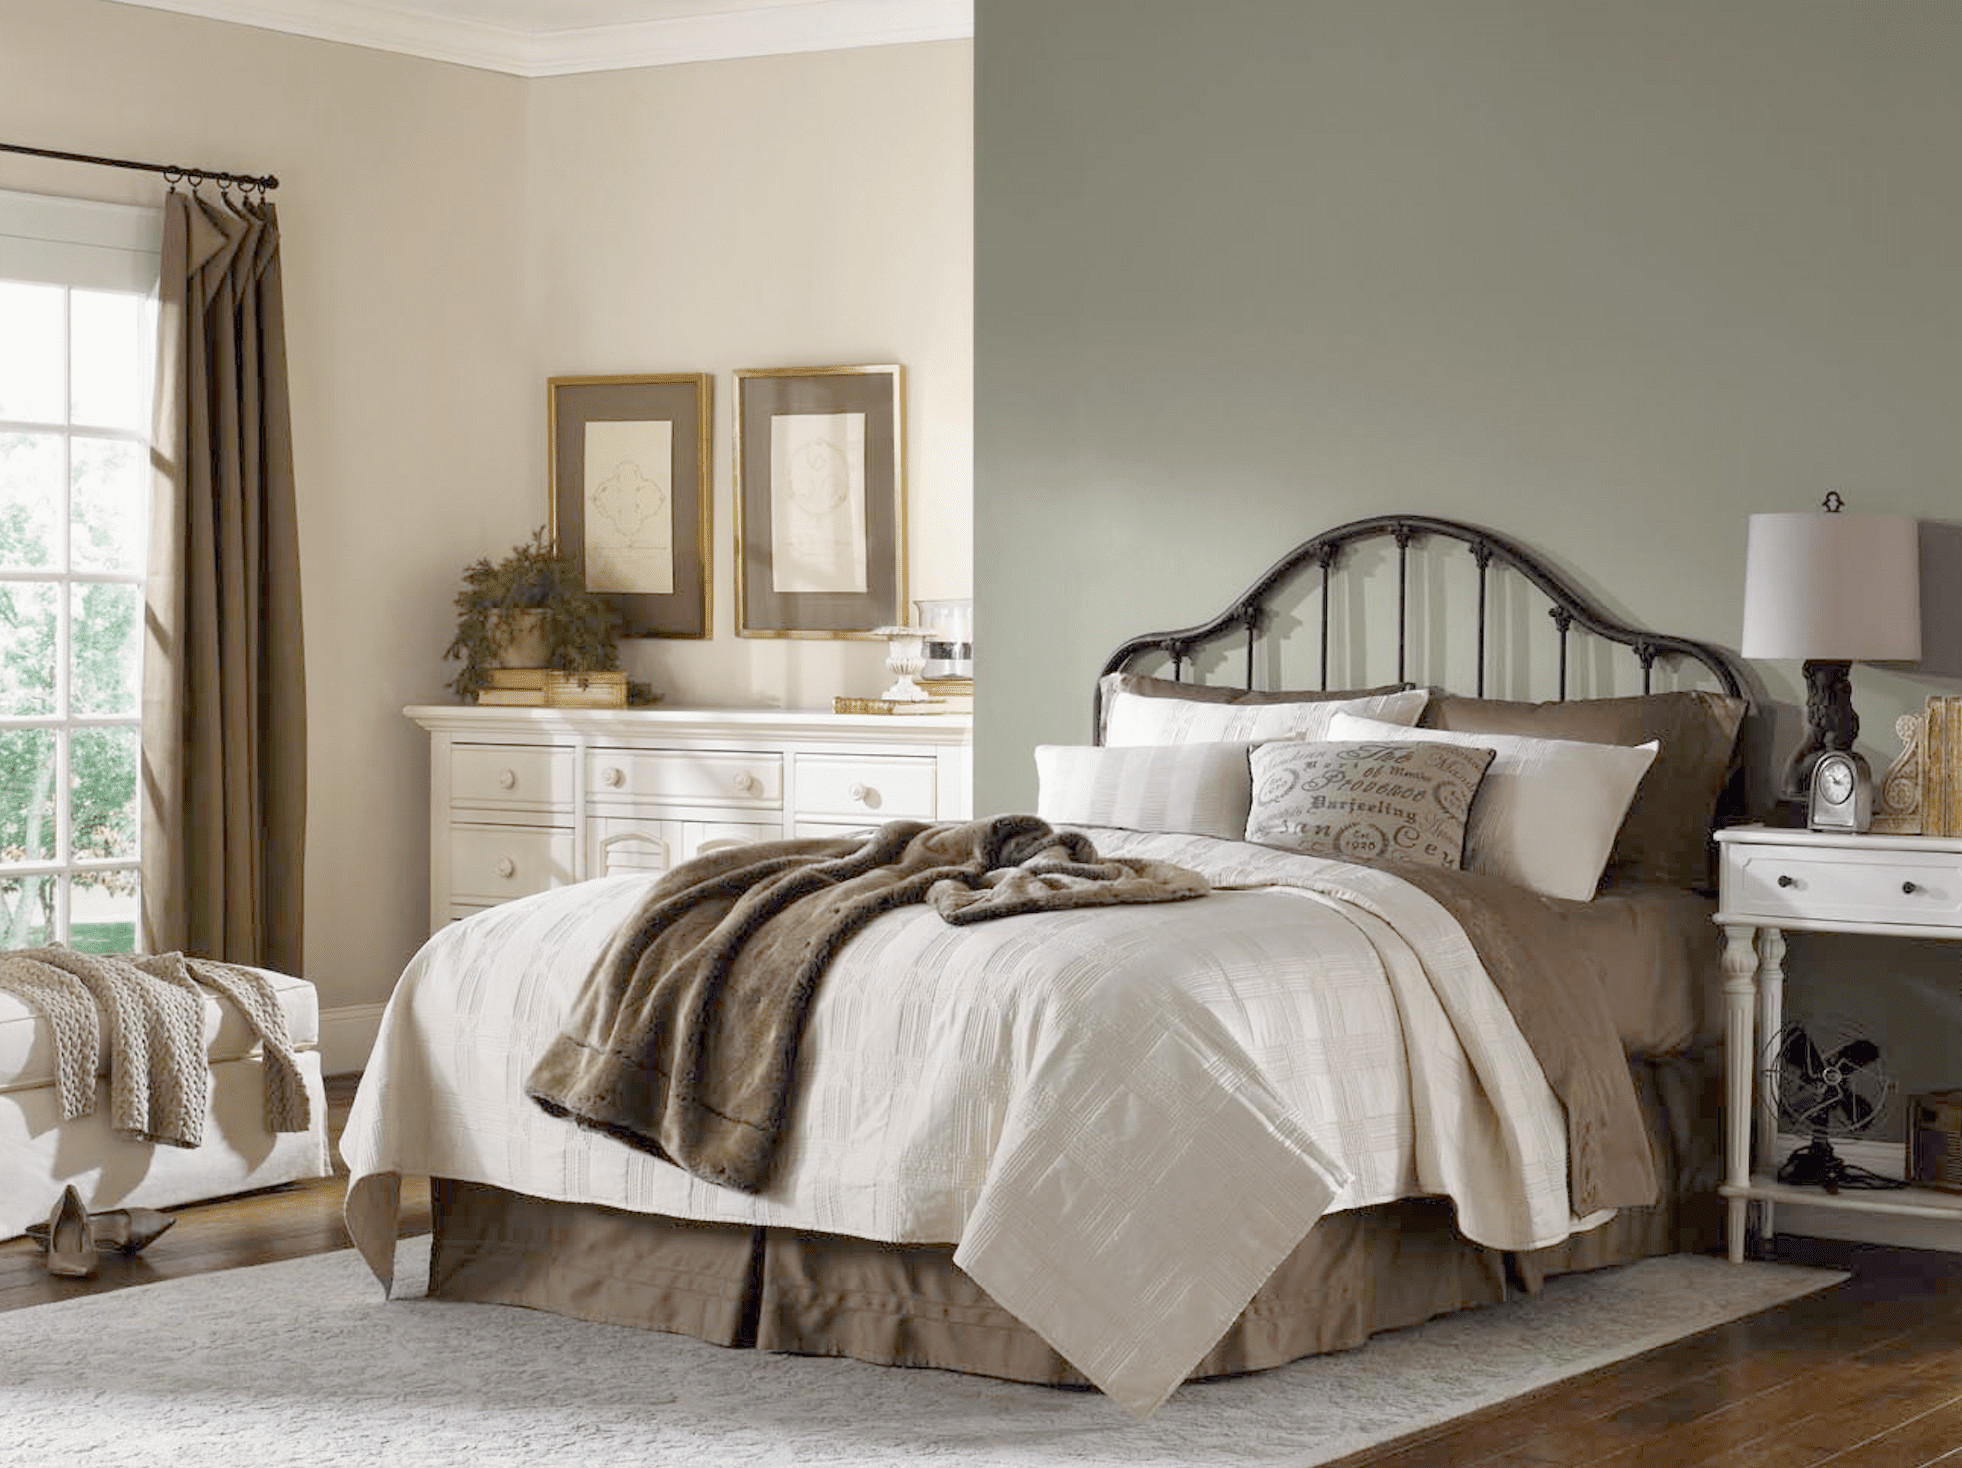 Paint Colors For The Bedroom
 8 Relaxing Sherwin Williams Paint Colors for Bedrooms